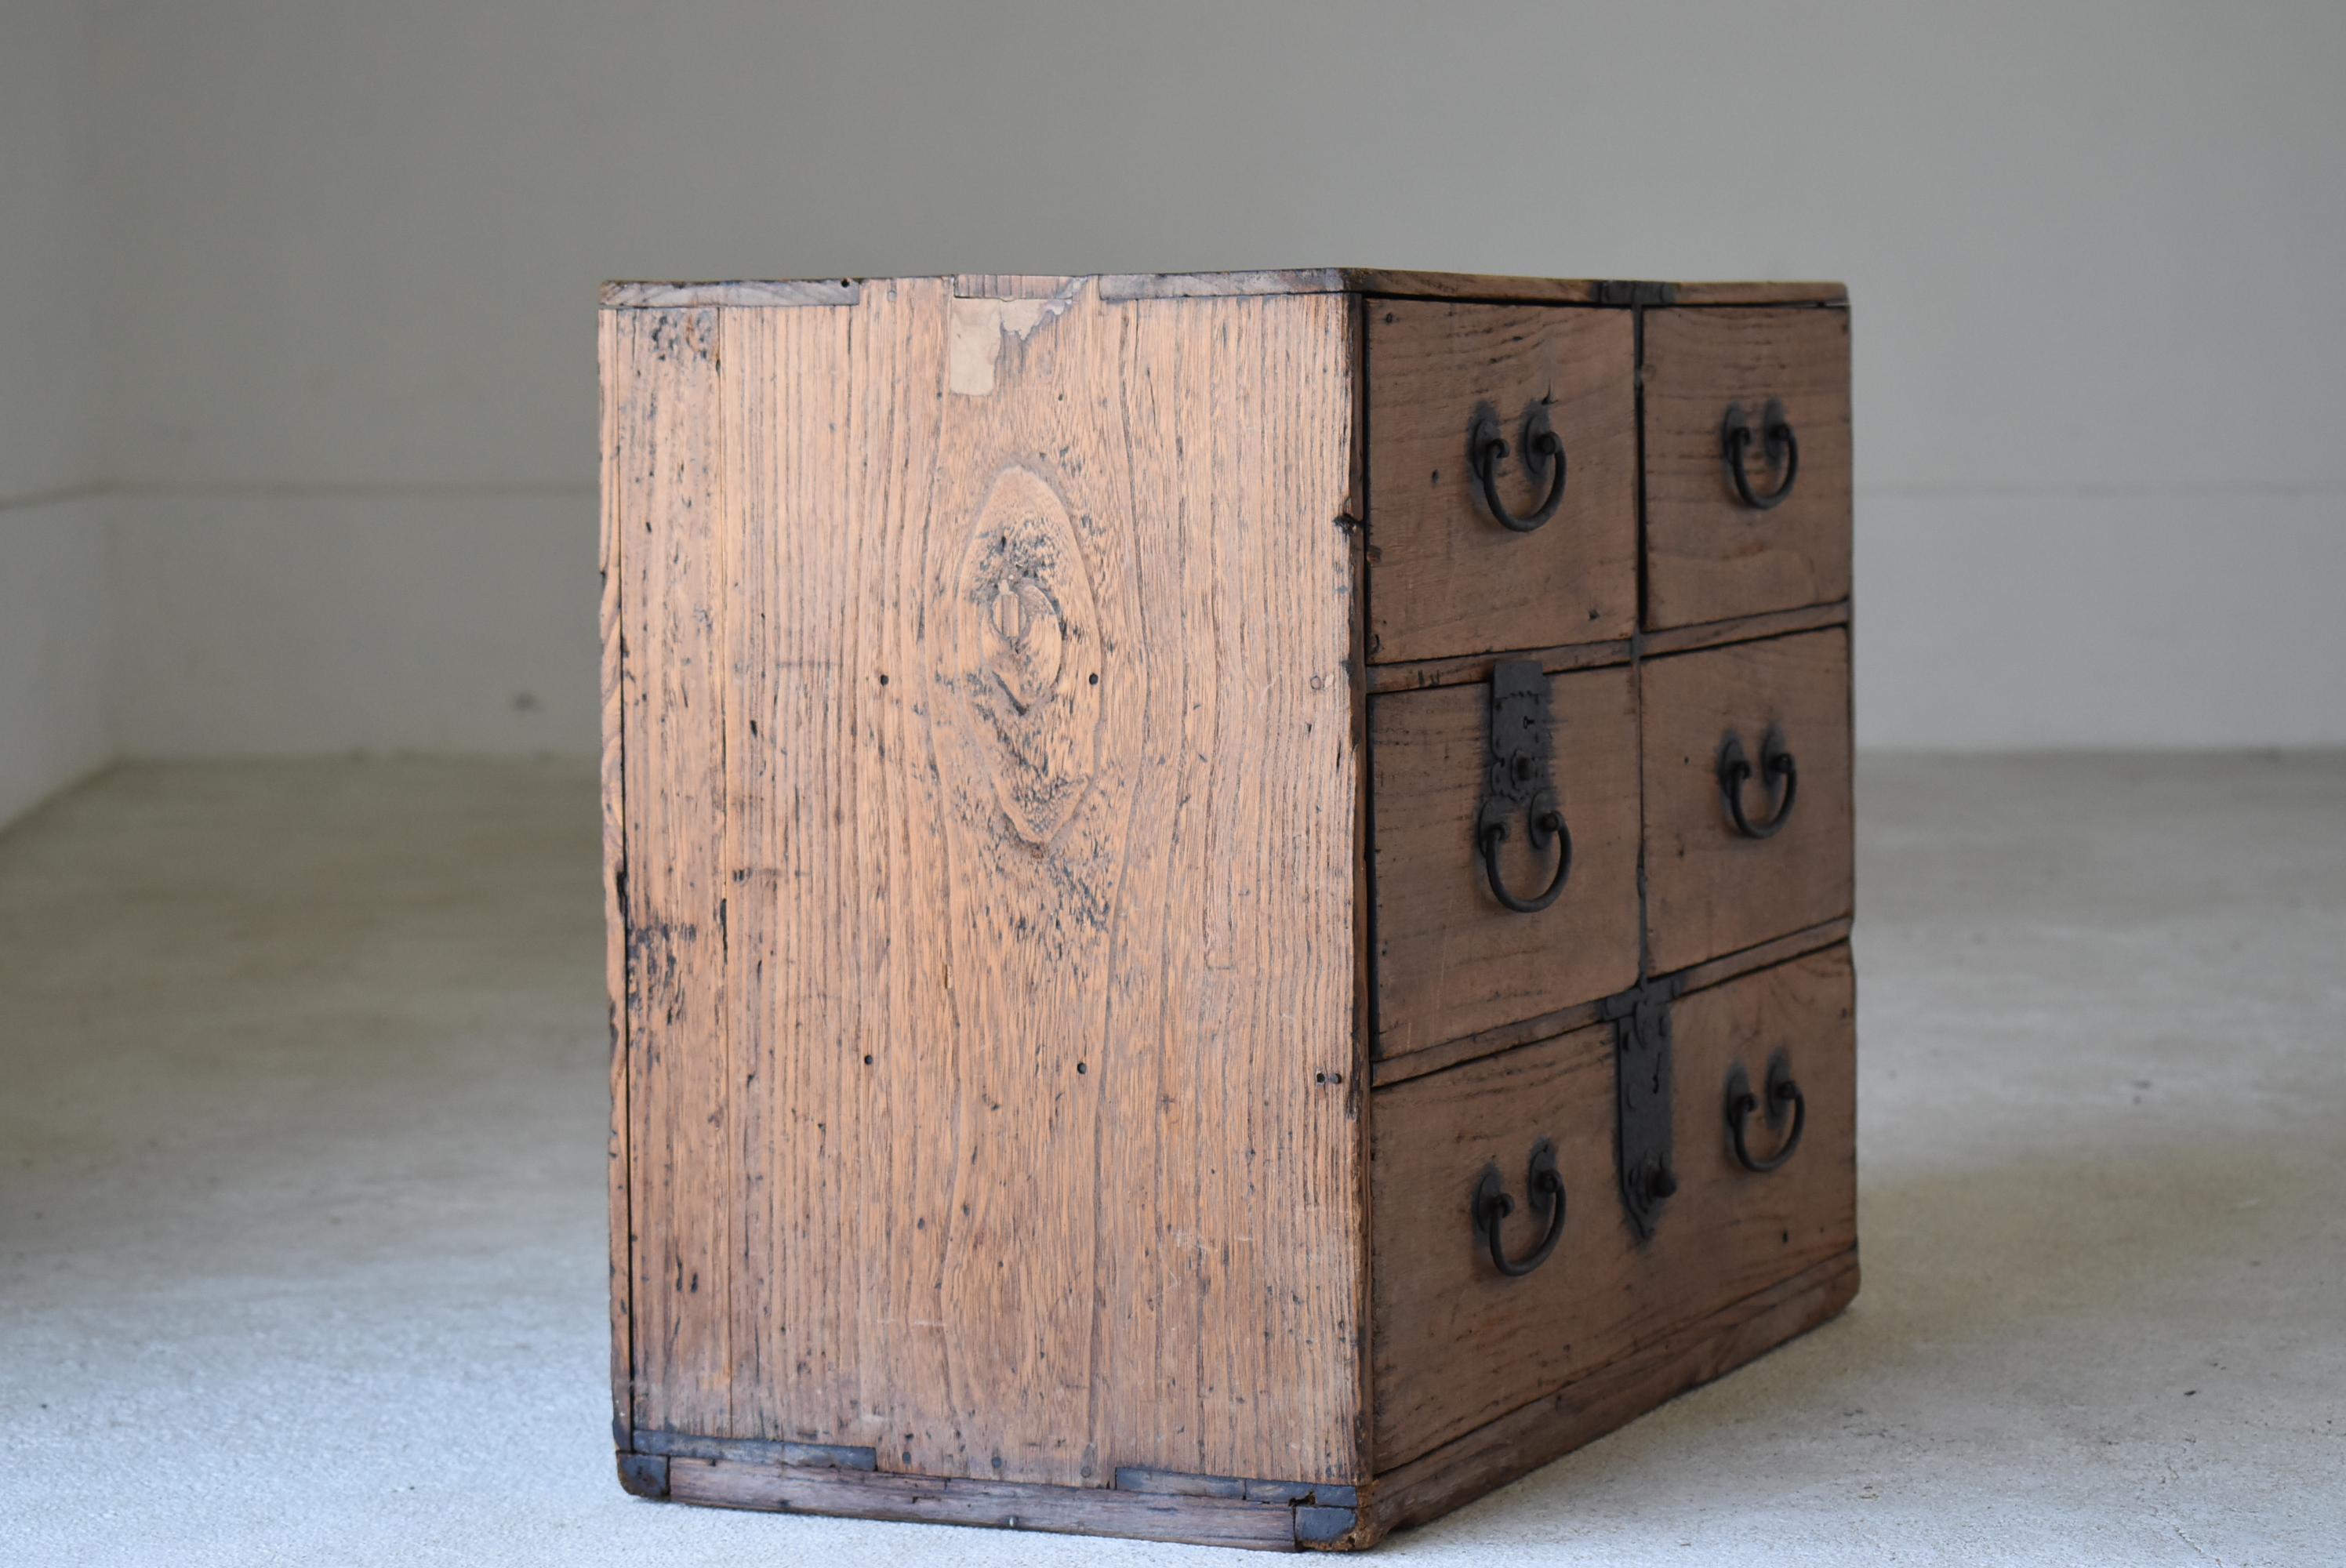 Japanese Antique Chests of Drawers 1860s-1900s /Tansu Storage Mingei Cabinet 5